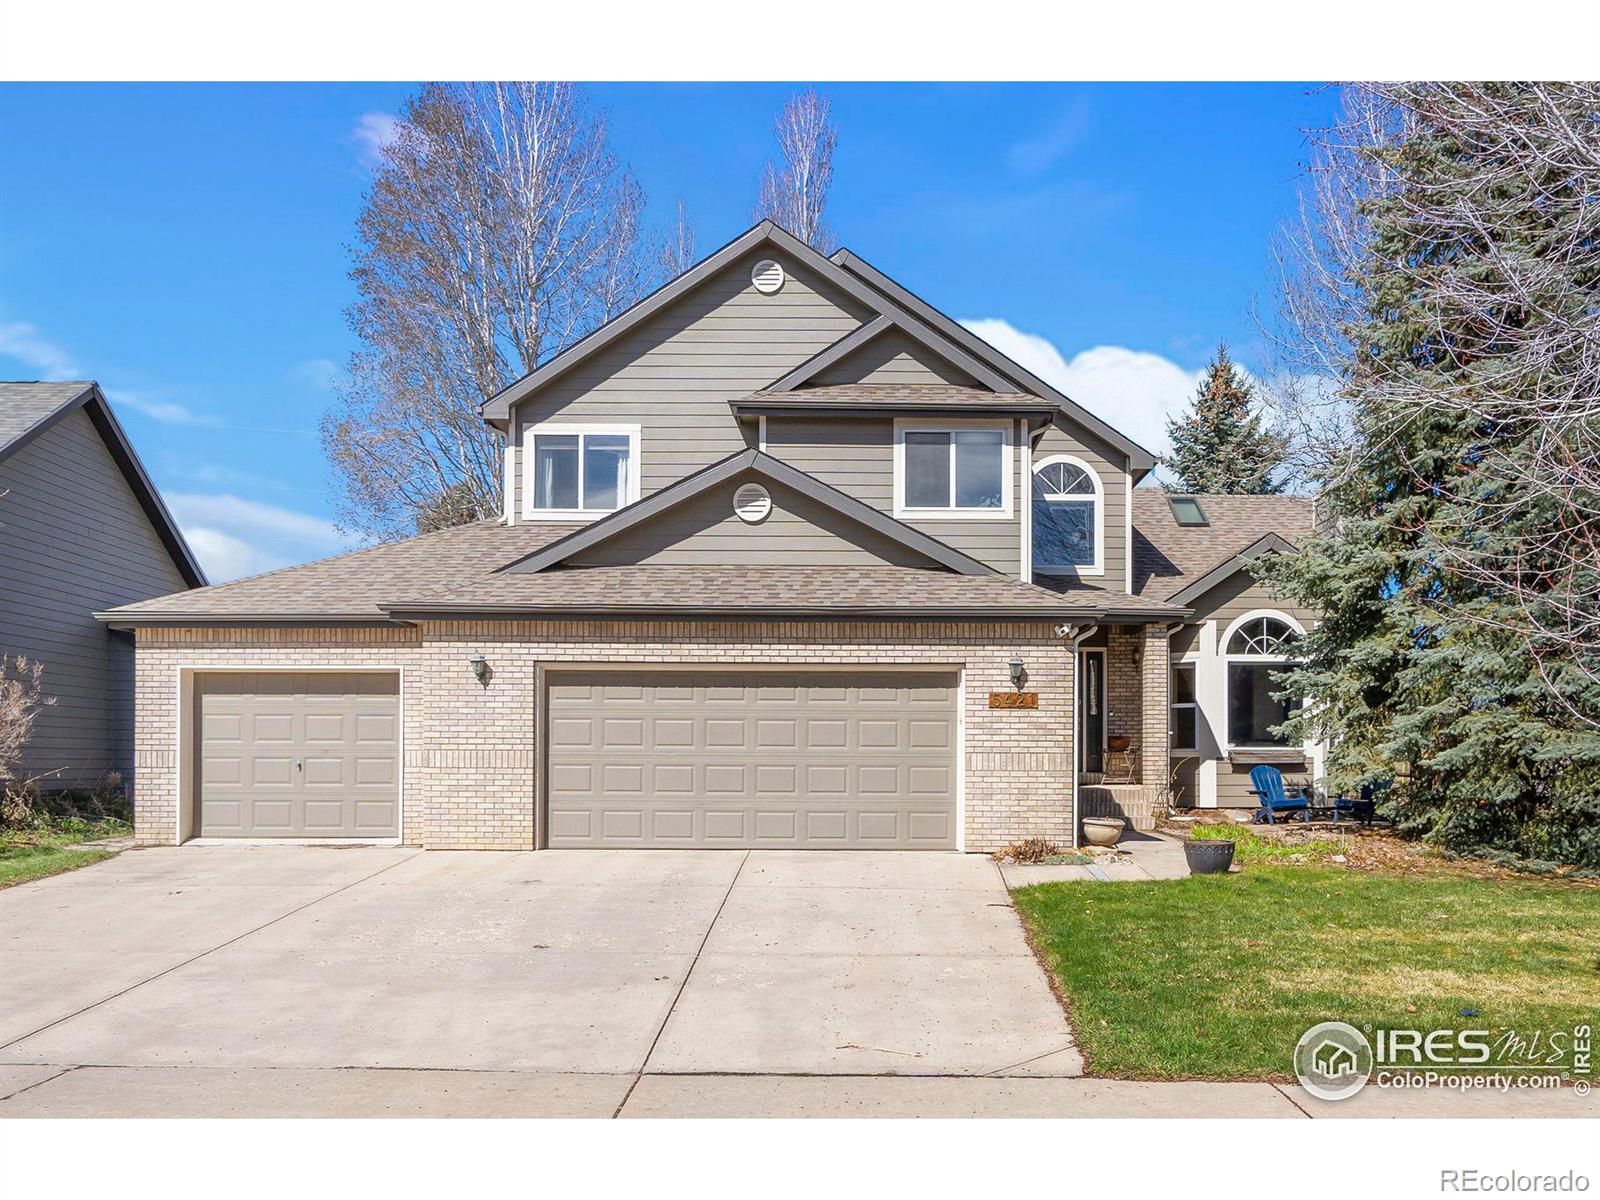 5421  Golden Willow Drive, fort collins MLS: 4567891006554 Beds: 4 Baths: 4 Price: $795,000